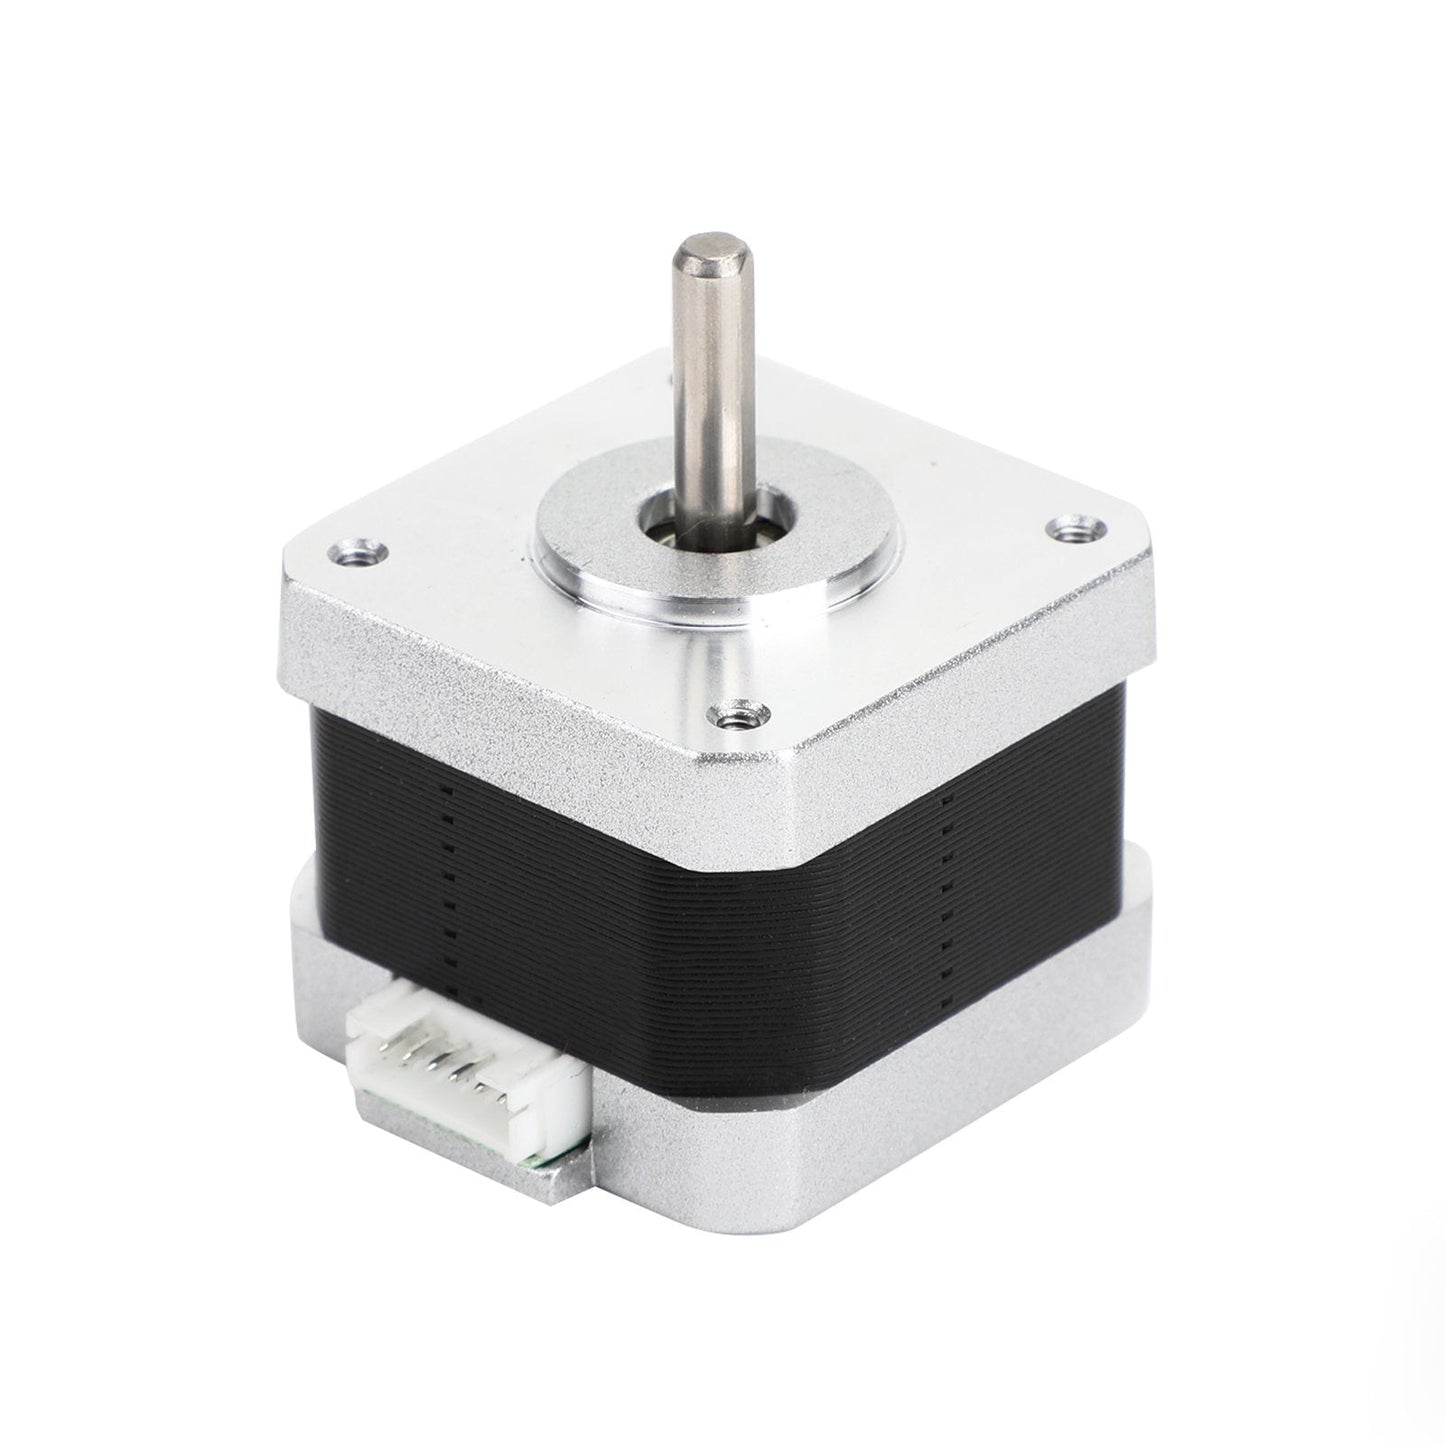 3D Printer 42-34 0.8A X/Y/Z-axis Stepper Motor For 3D Creality Ender 3 Pro CR-10